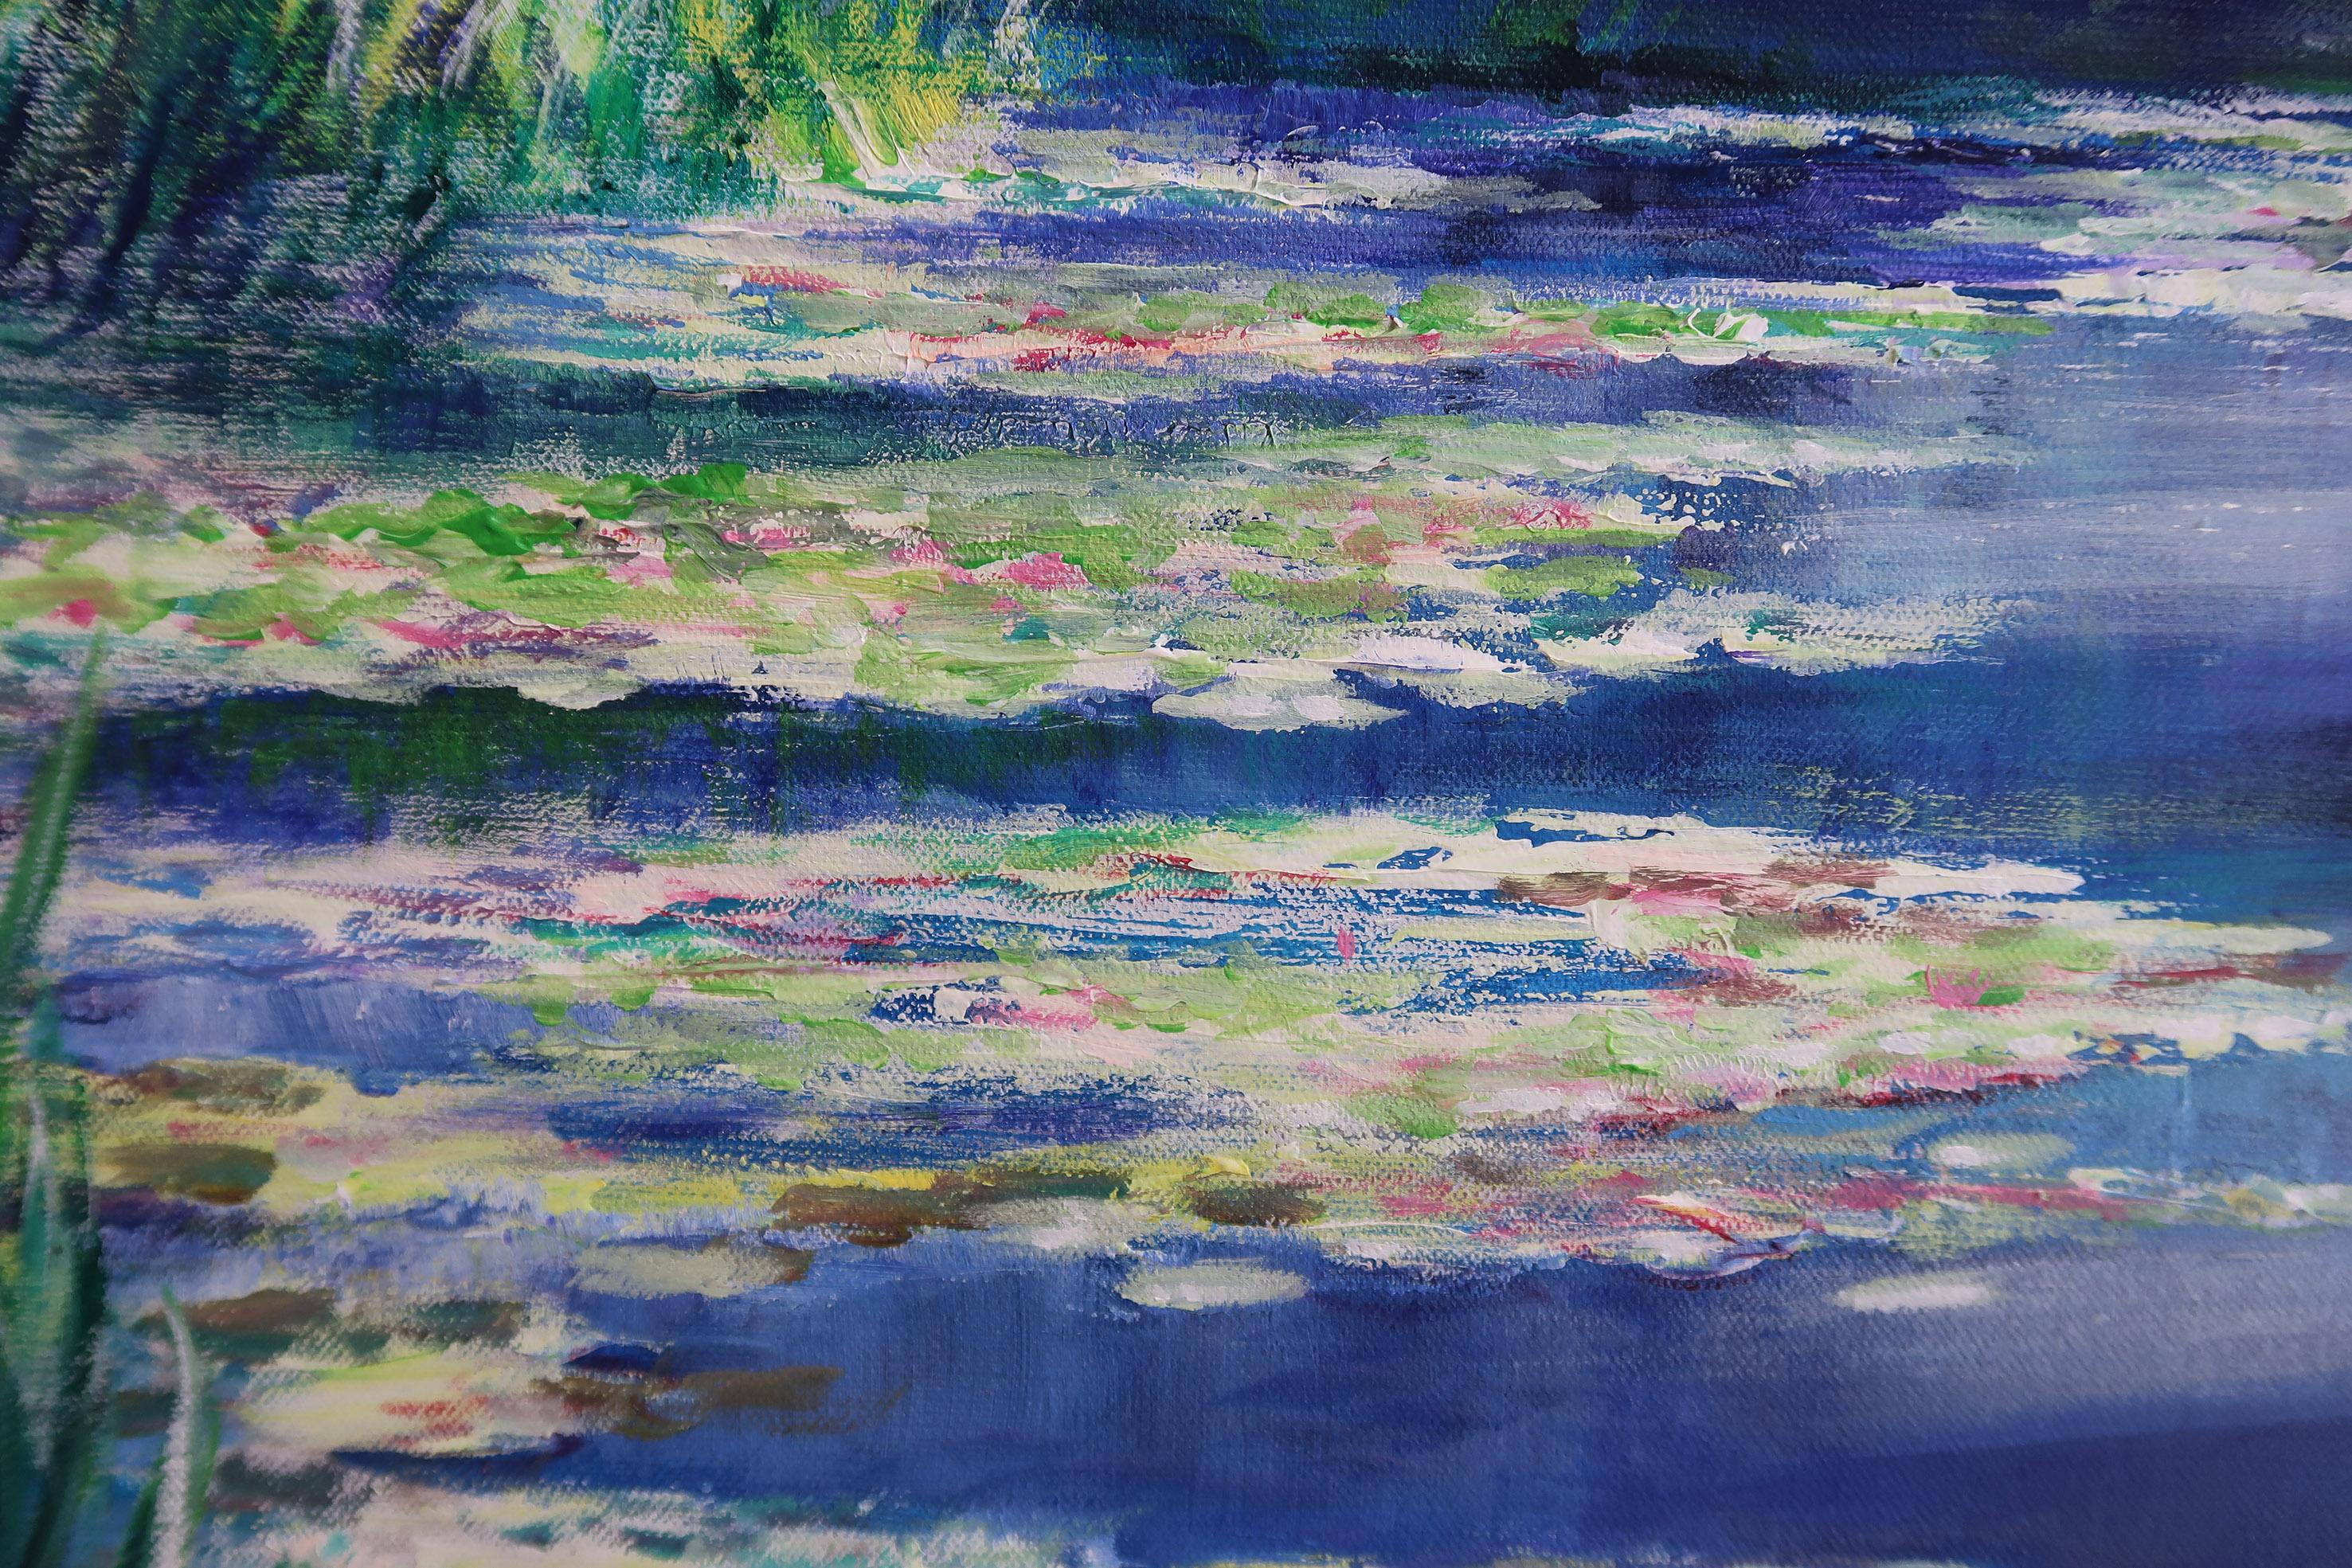 Harmony in blue at Giverny (Water Gardens at Claude Monet’s house), Original art - Impressionist Painting by Mary Chaplin